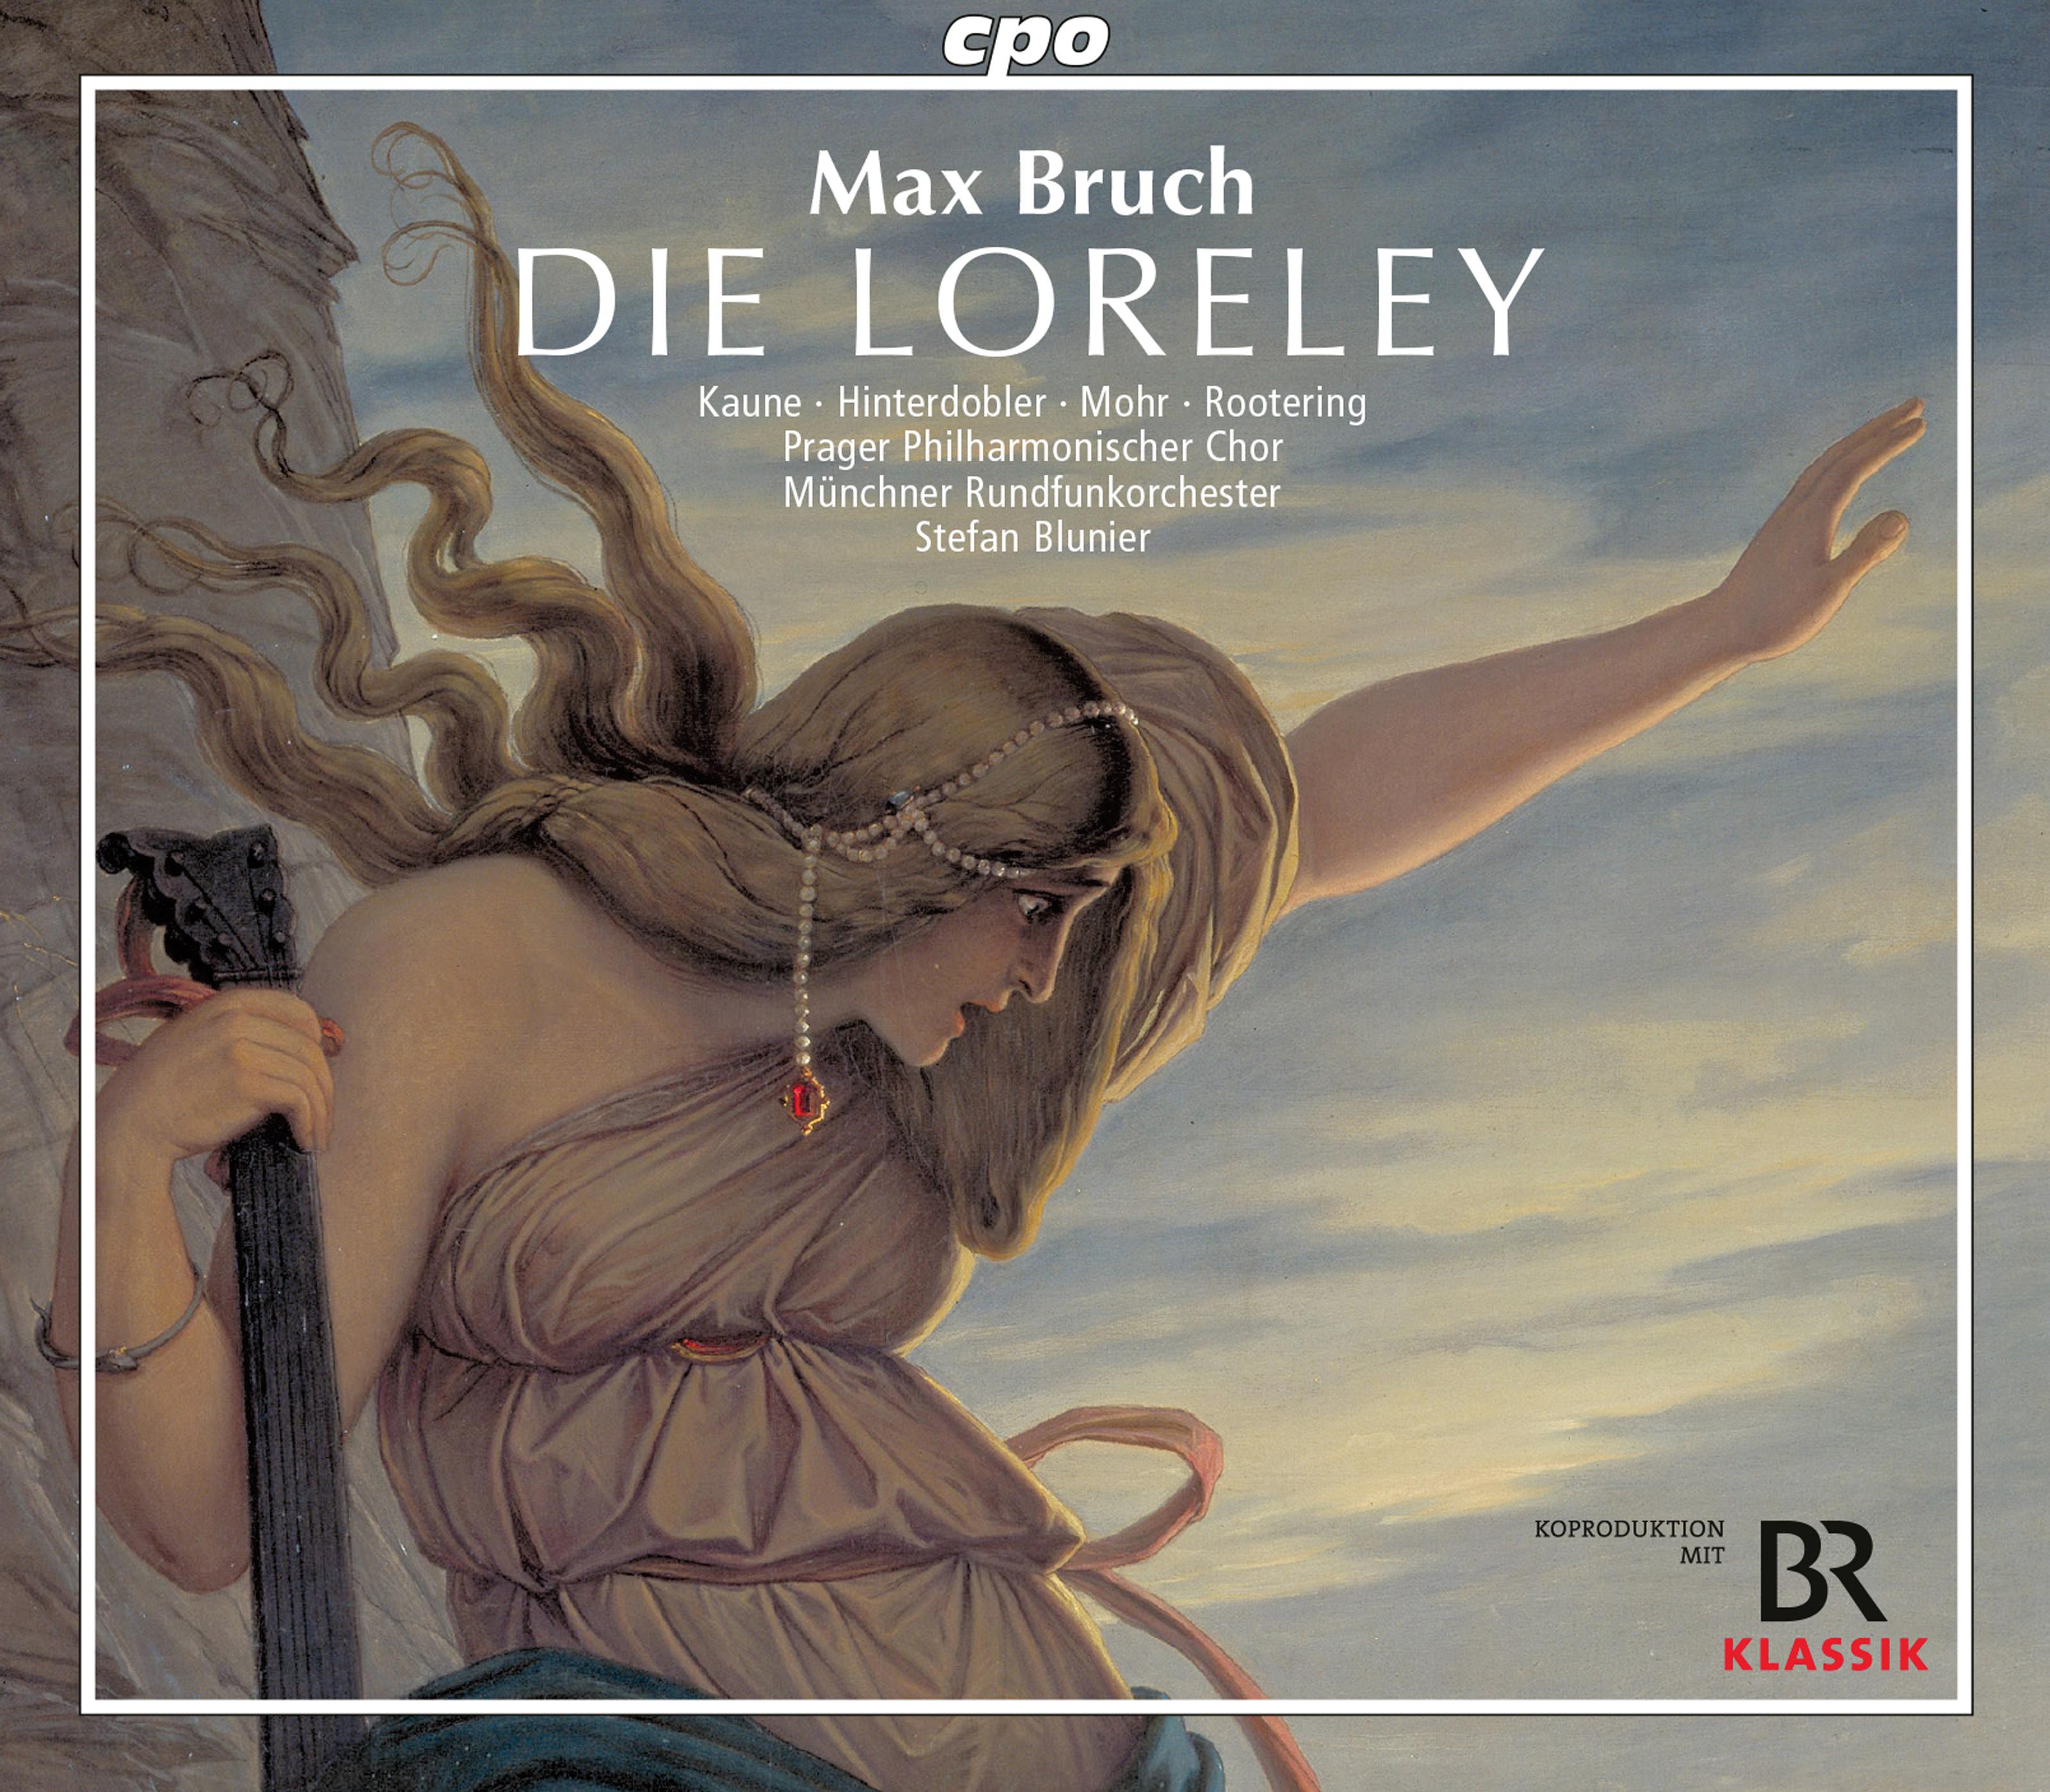 Die Loreley, Act I: Ave Maria!